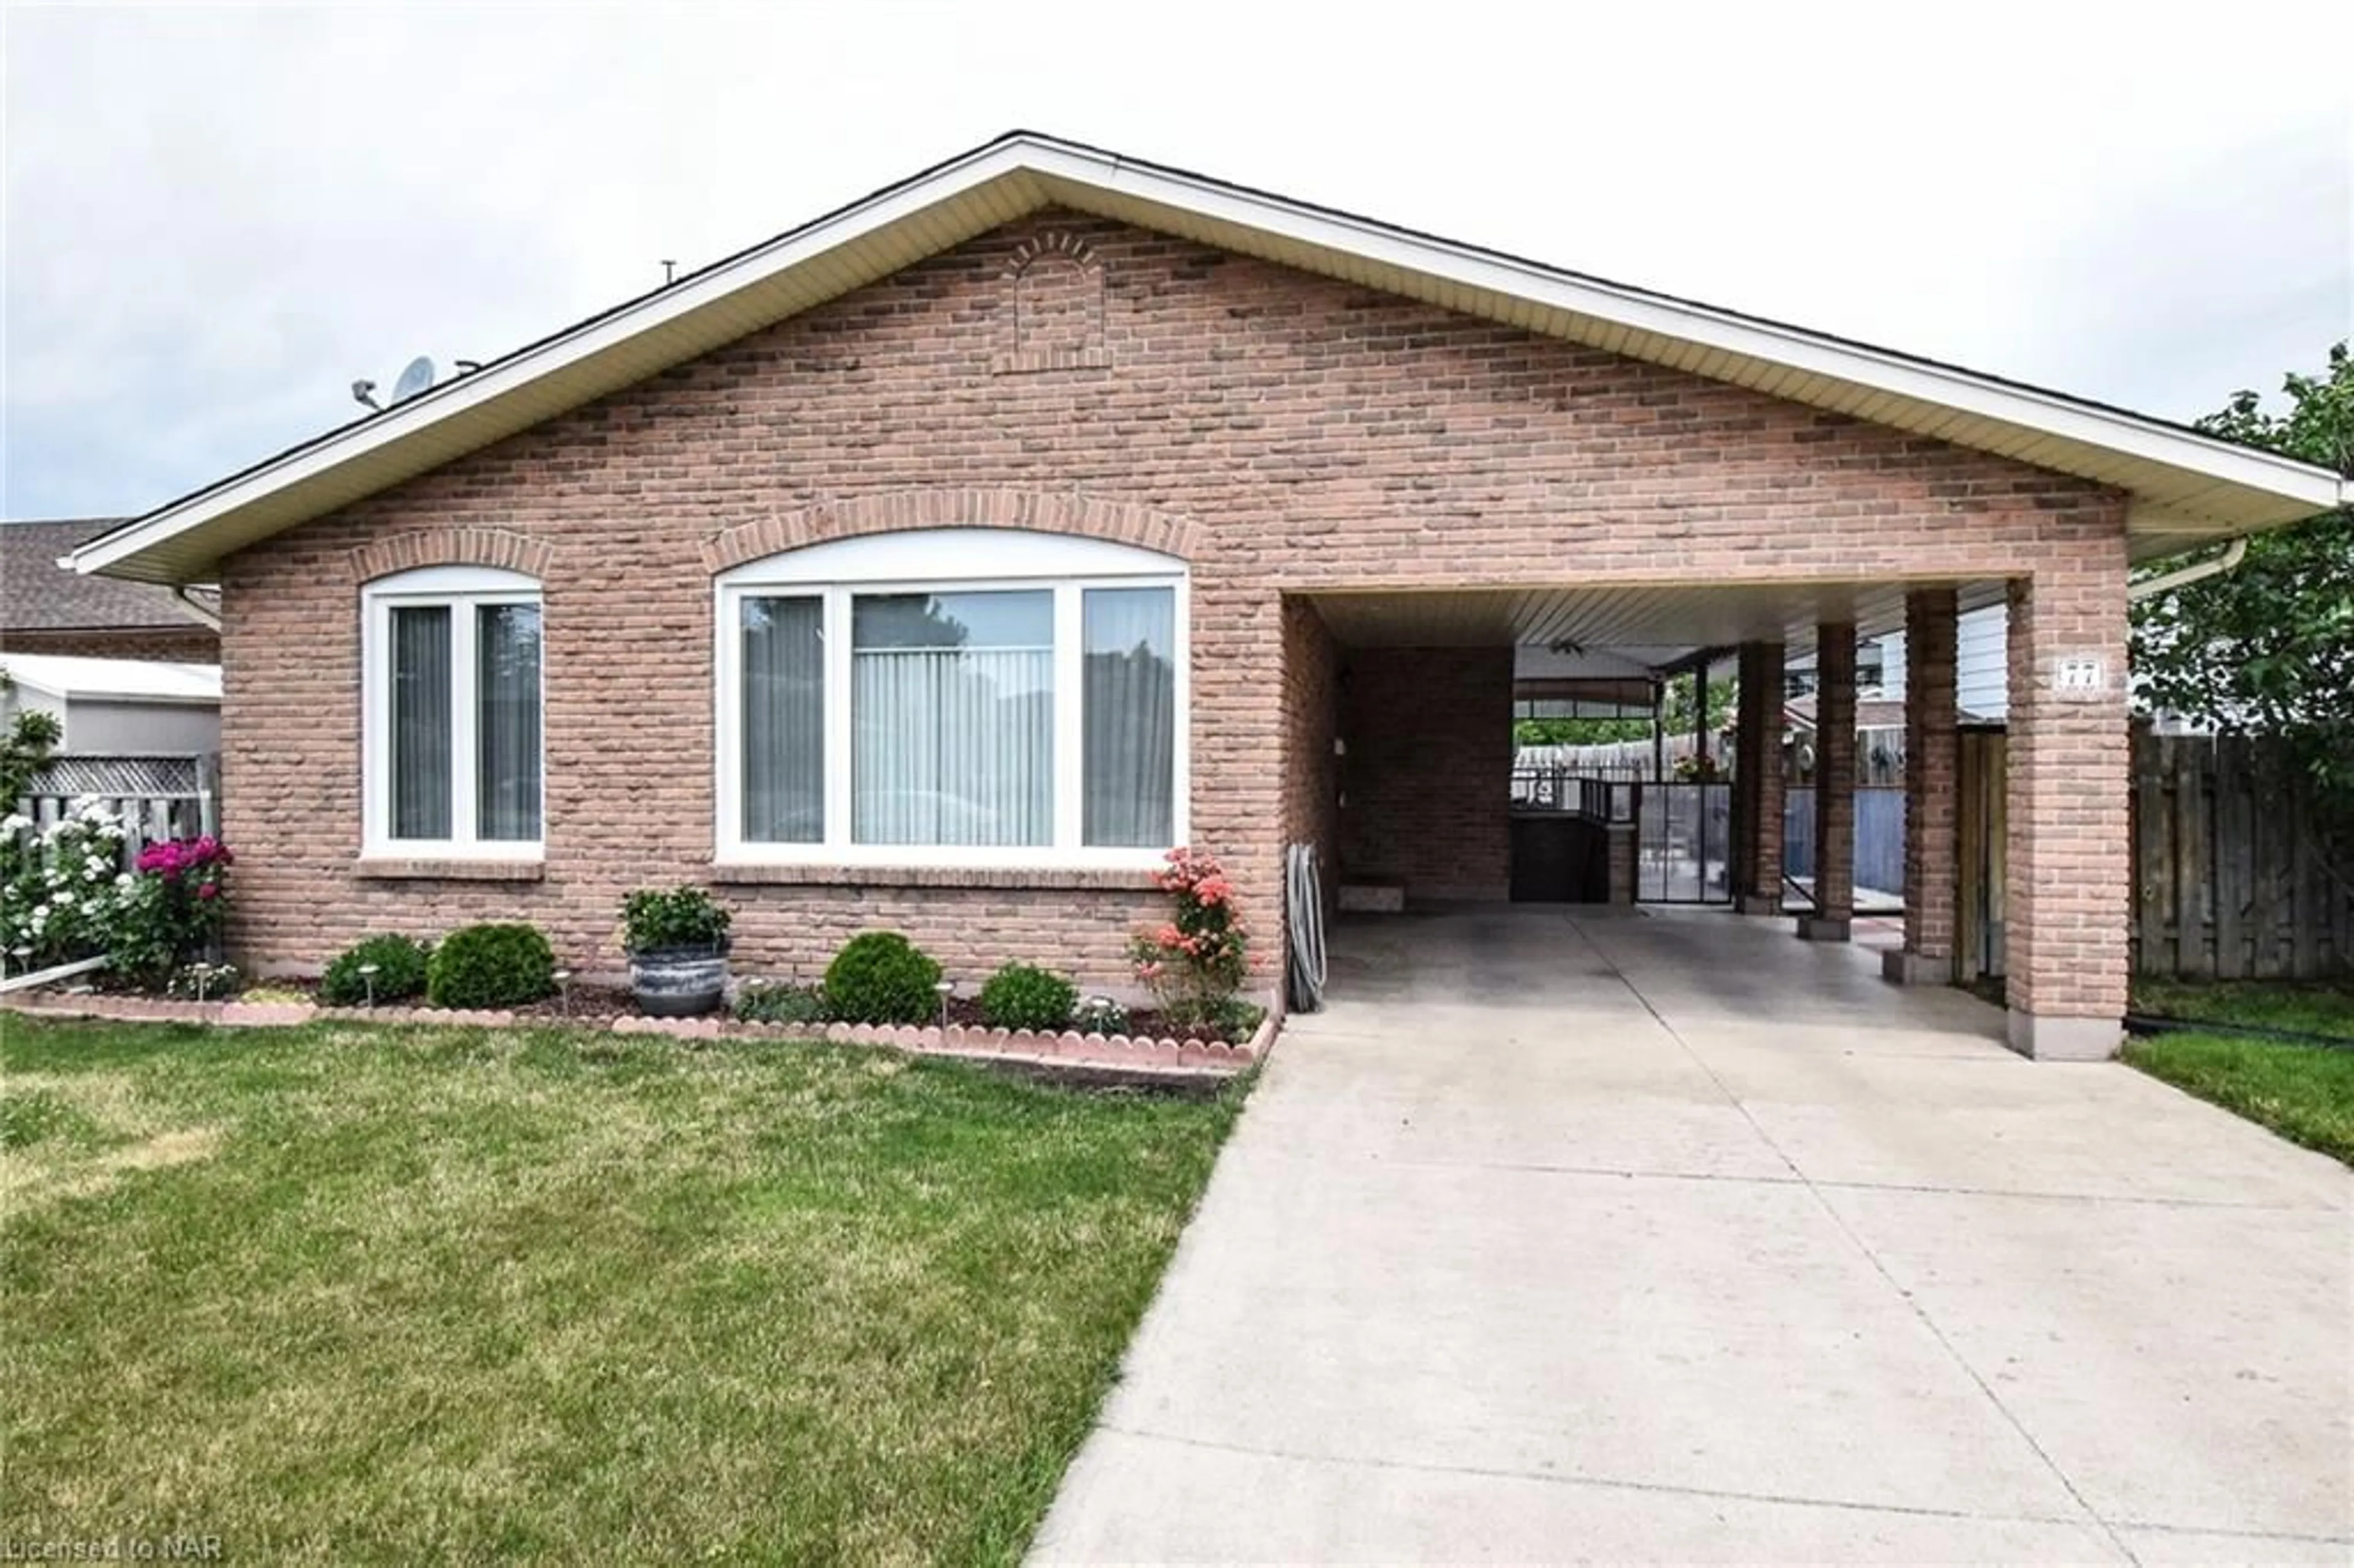 Home with brick exterior material for 77 Sherman Dr, St. Catharines Ontario L2N 2L6